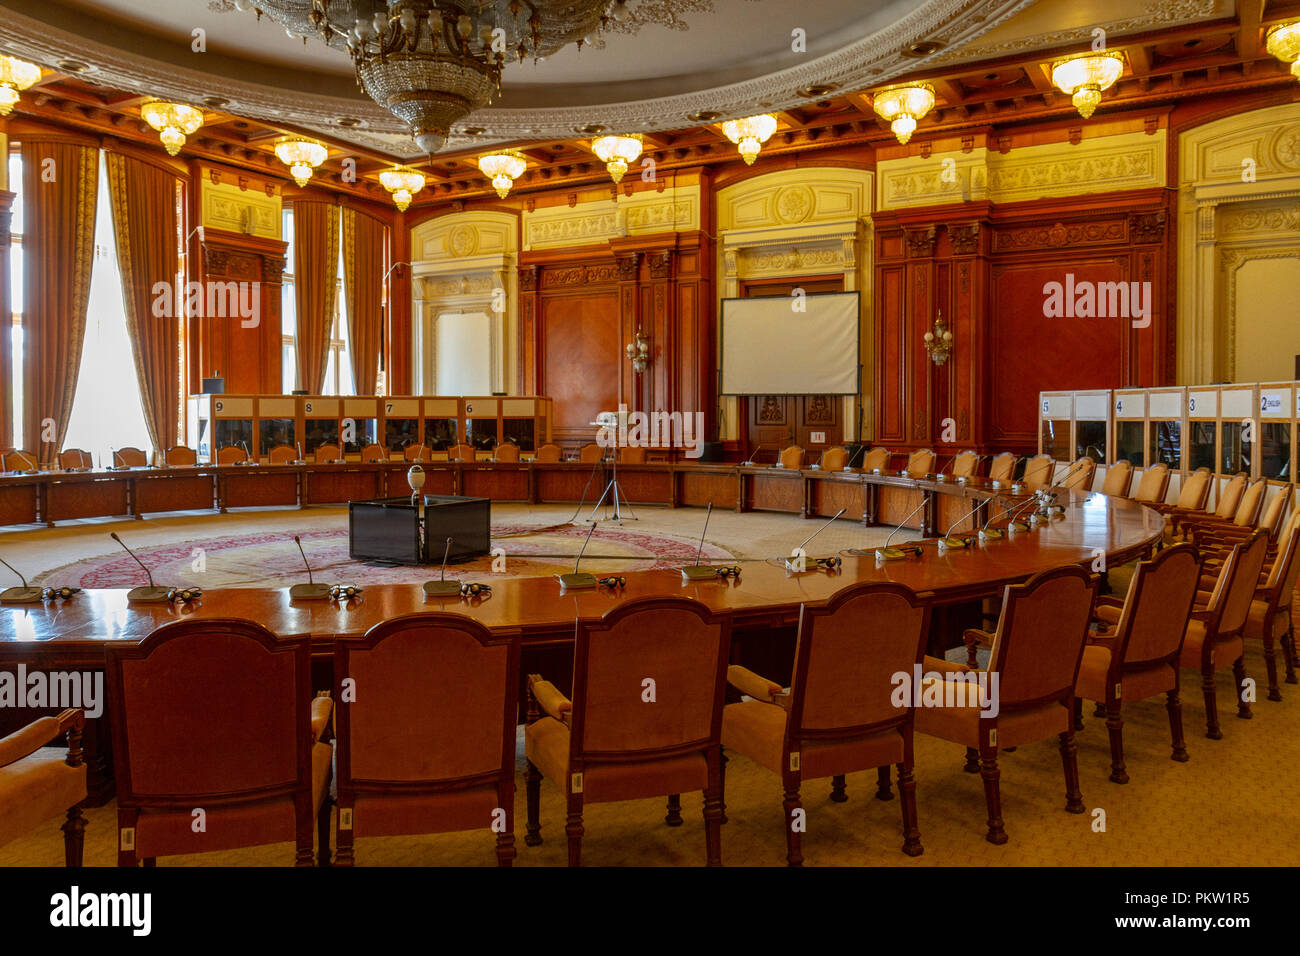 The Human Rights Hall inside the Palace of the Parliament, House of the Republic, Bucharest, Romania. Stock Photo